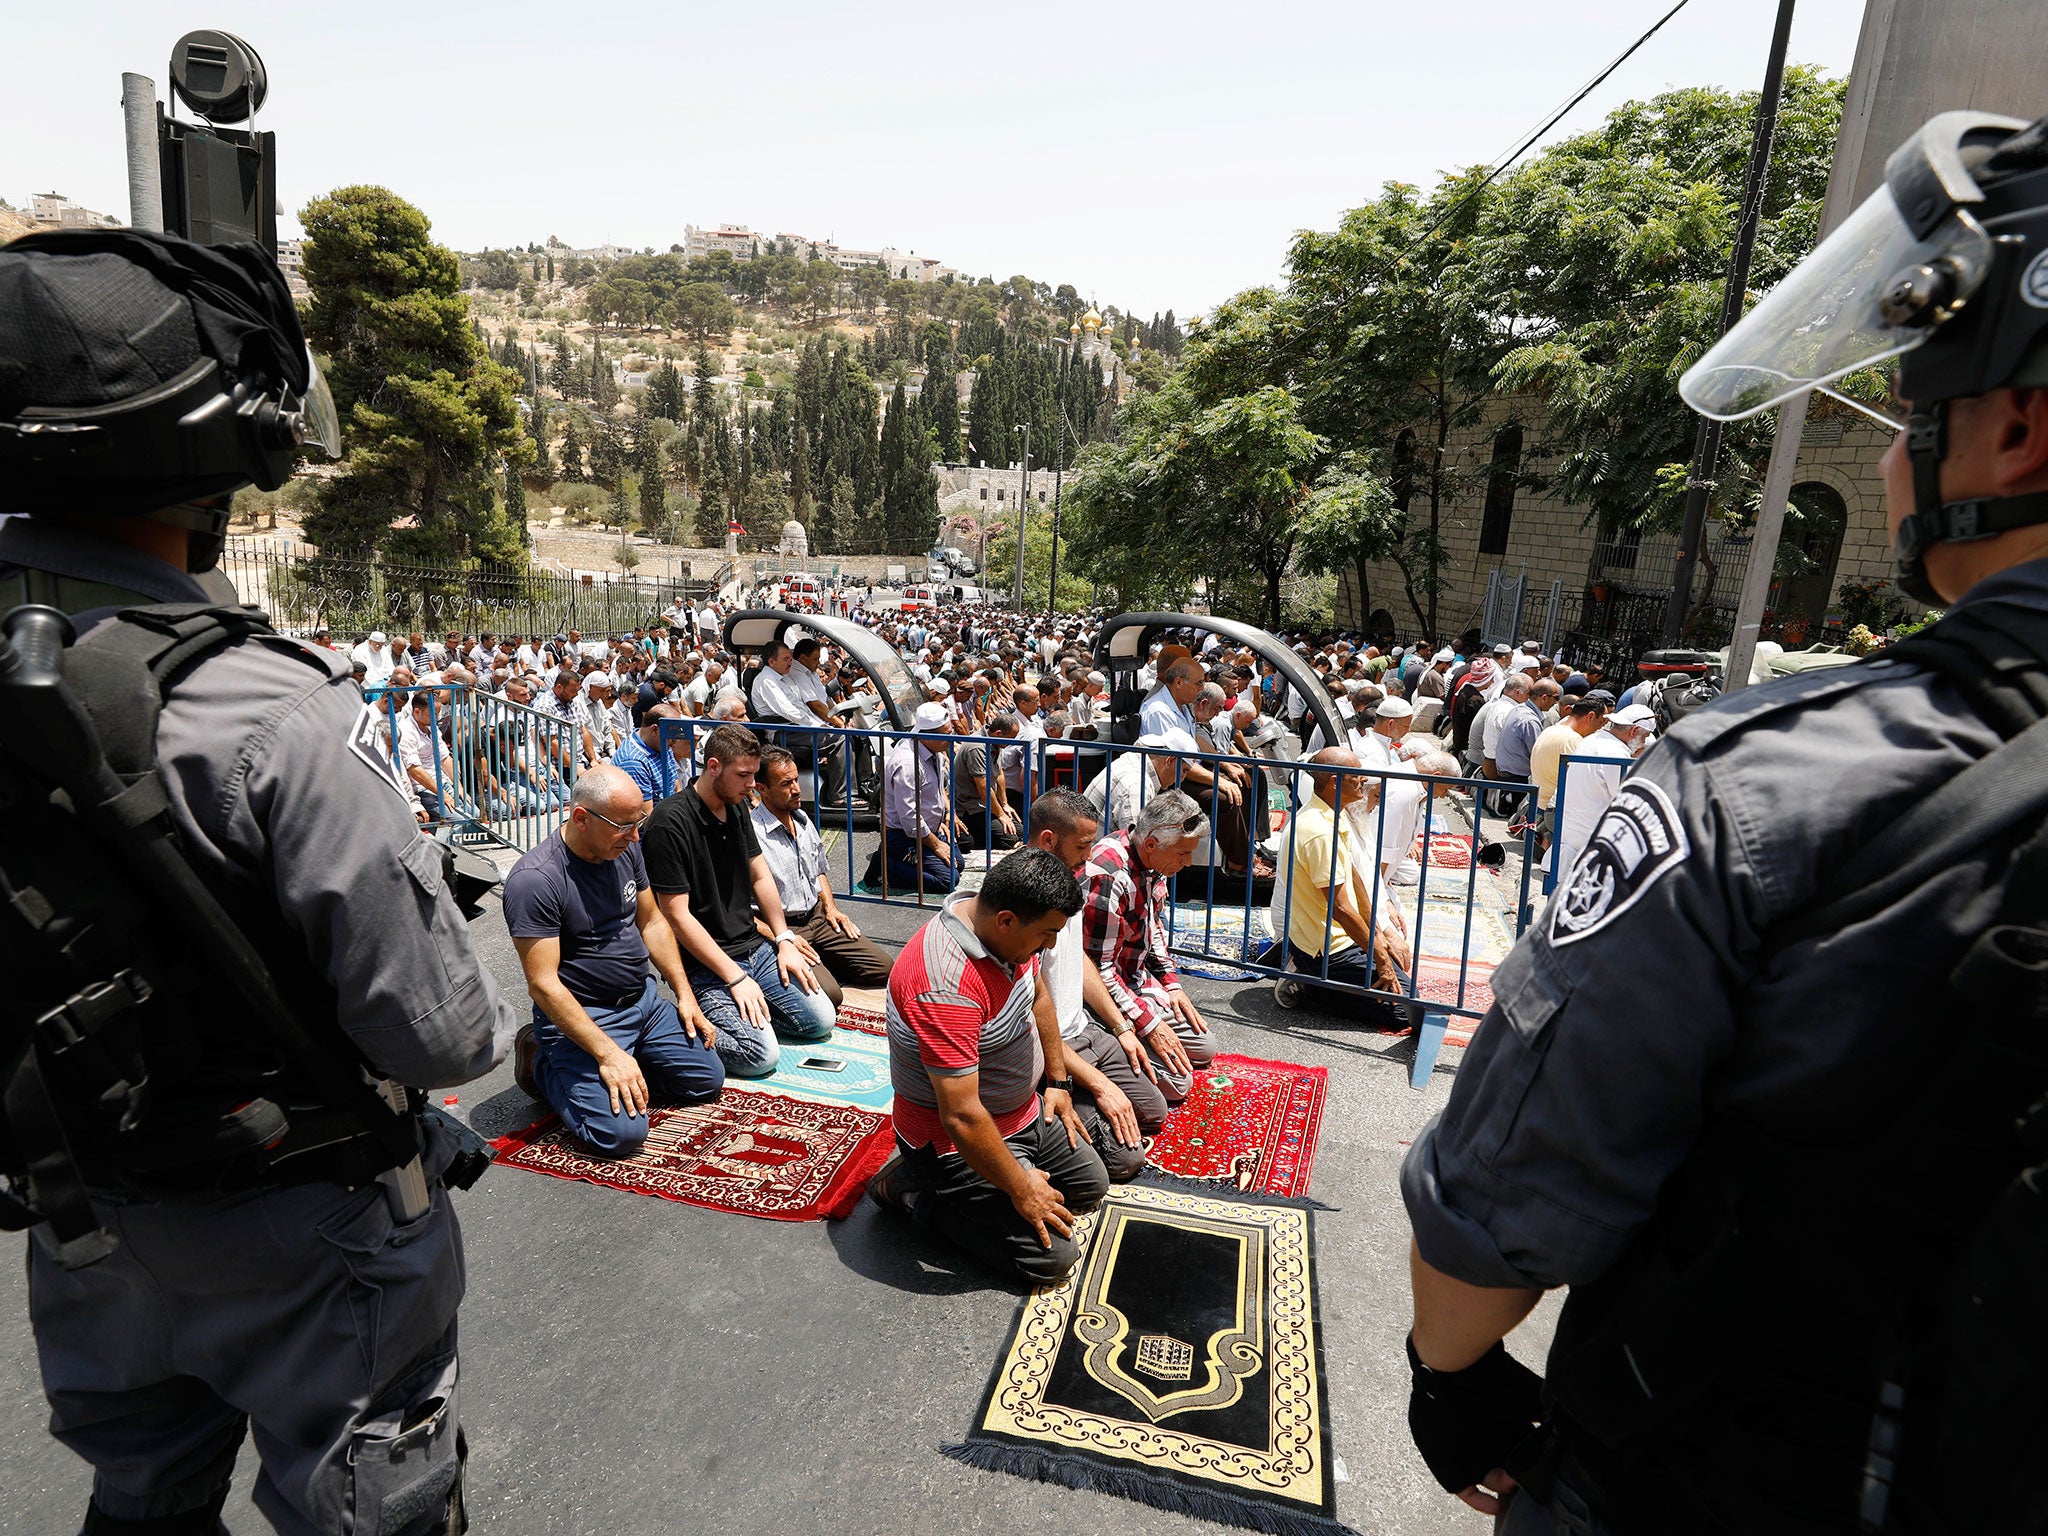 Palestinians pray on the street close to Lion's Gate in the Old City of Jerusalem, closely watched by Israeli security during a mass street Friday prayer on 21 July 2017.